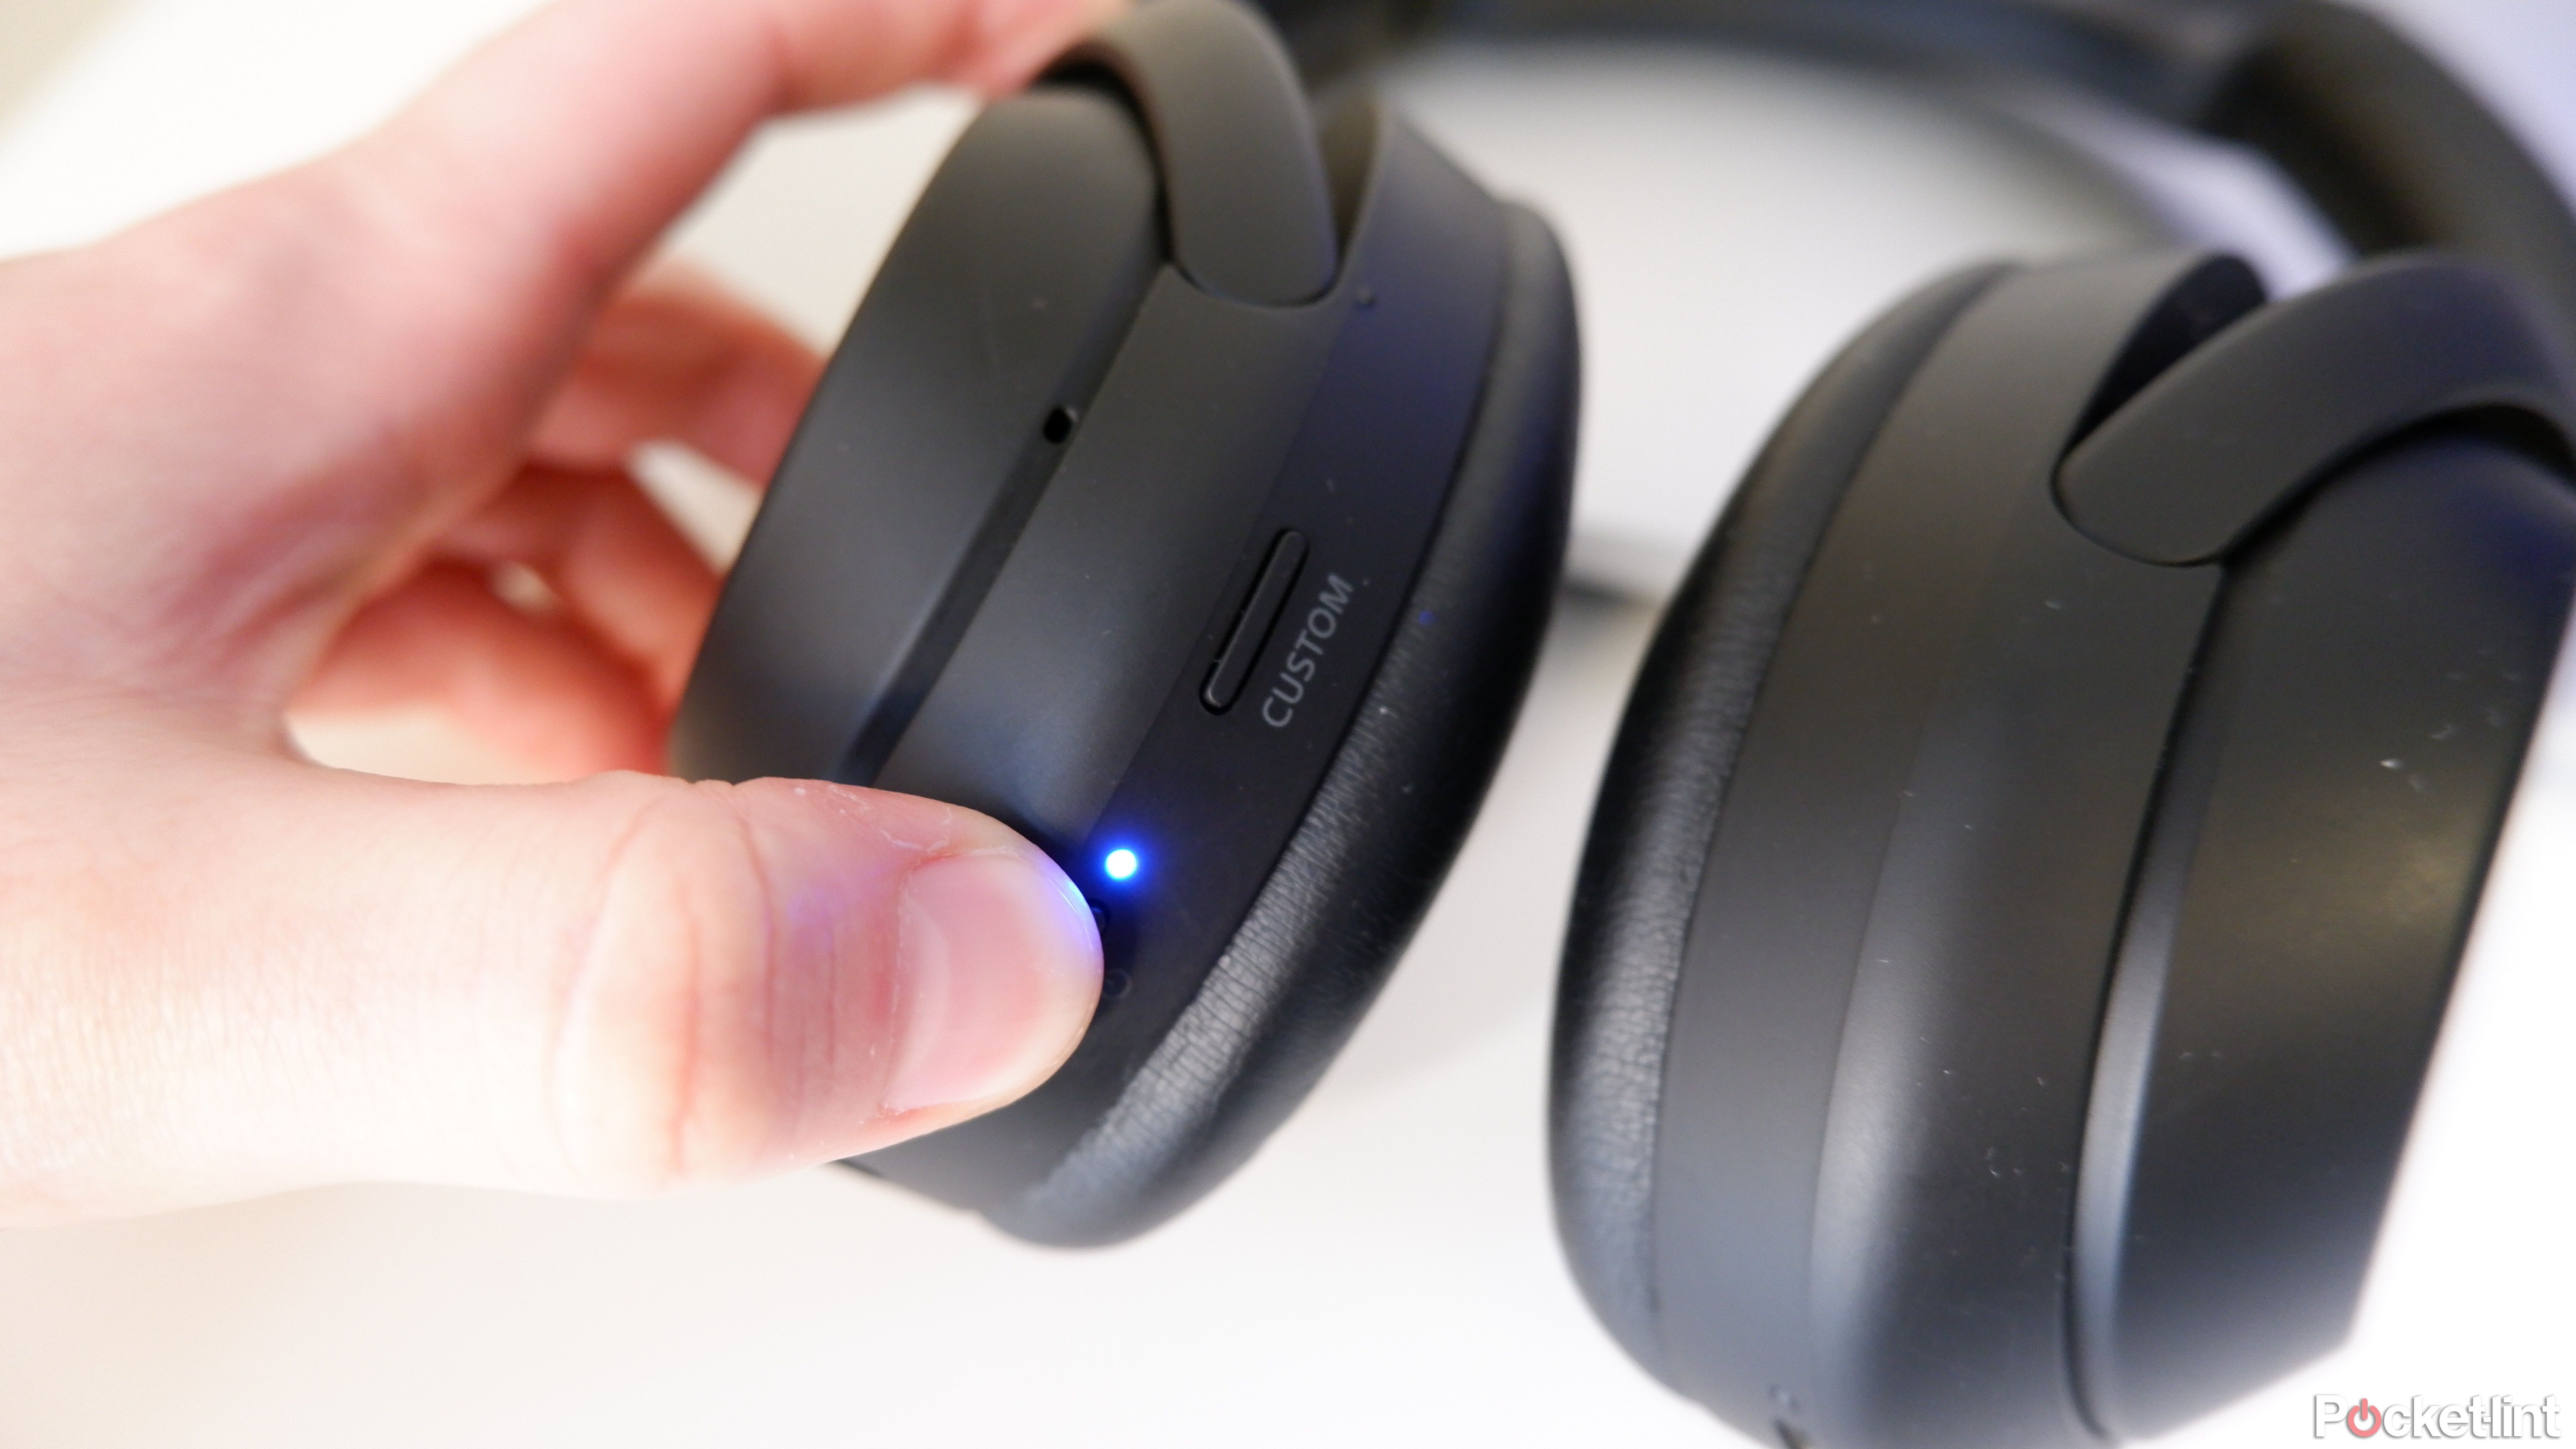 The Sony WH-1000XM4 is in Bluetooth pairing mode with your thumb pressing the power button and the blue LED illuminated.